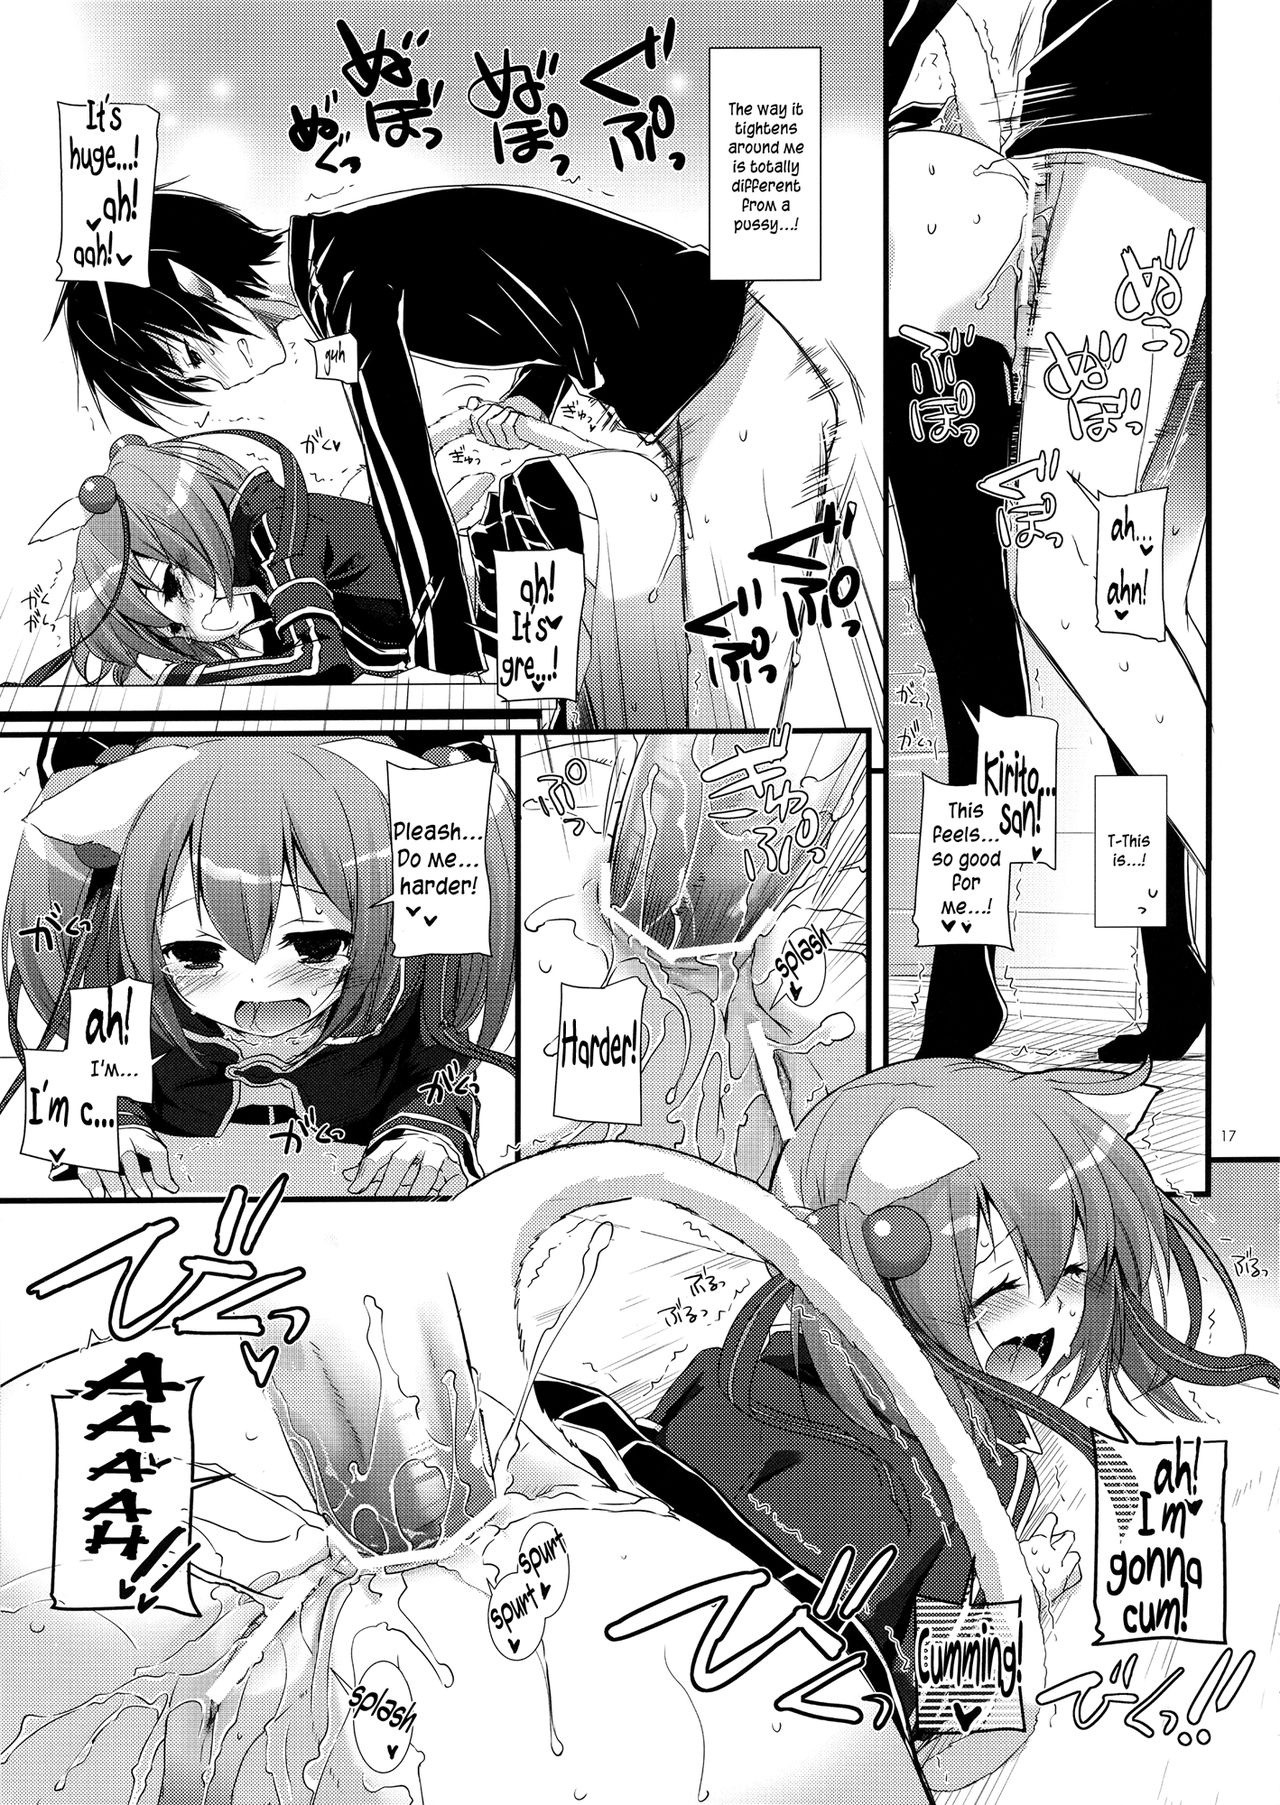 D.L. Action 72 hentai manga picture 16